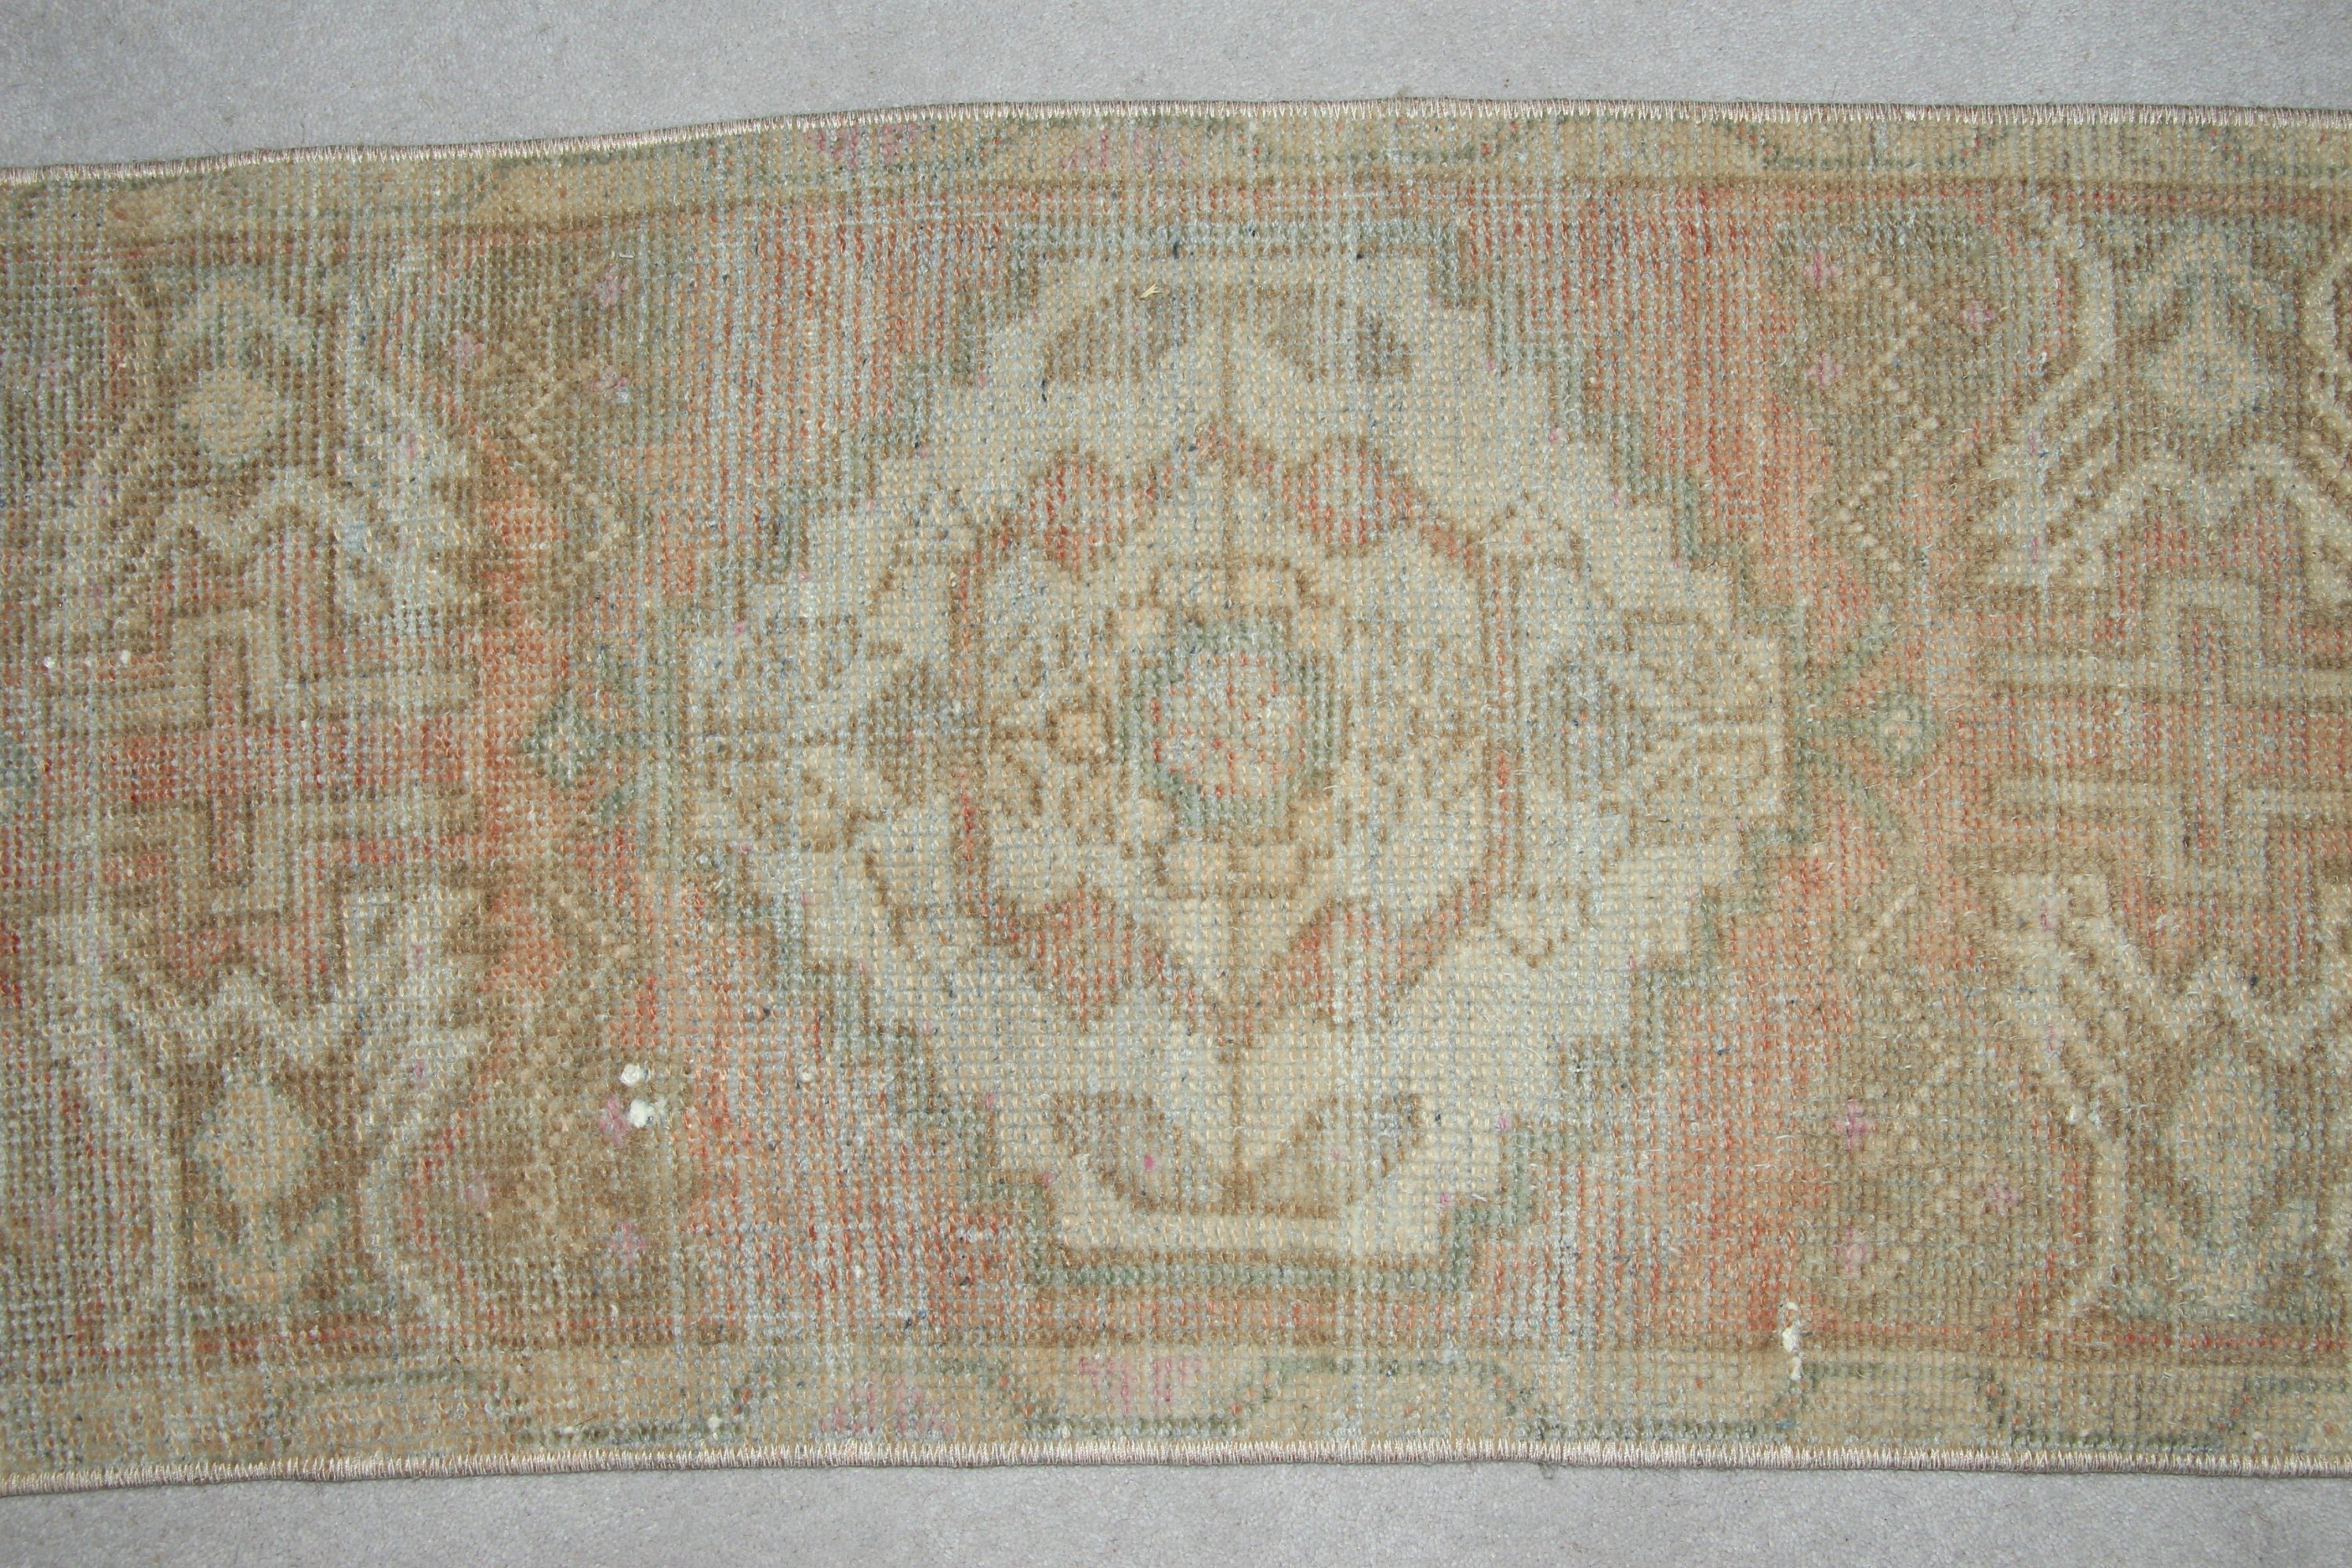 Turkish Rug, Car Mat Rug, Cool Rugs, Dorm Rug, Beige  1.4x3.2 ft Small Rug, Rugs for Wall Hanging, Vintage Rug, Kitchen Rugs